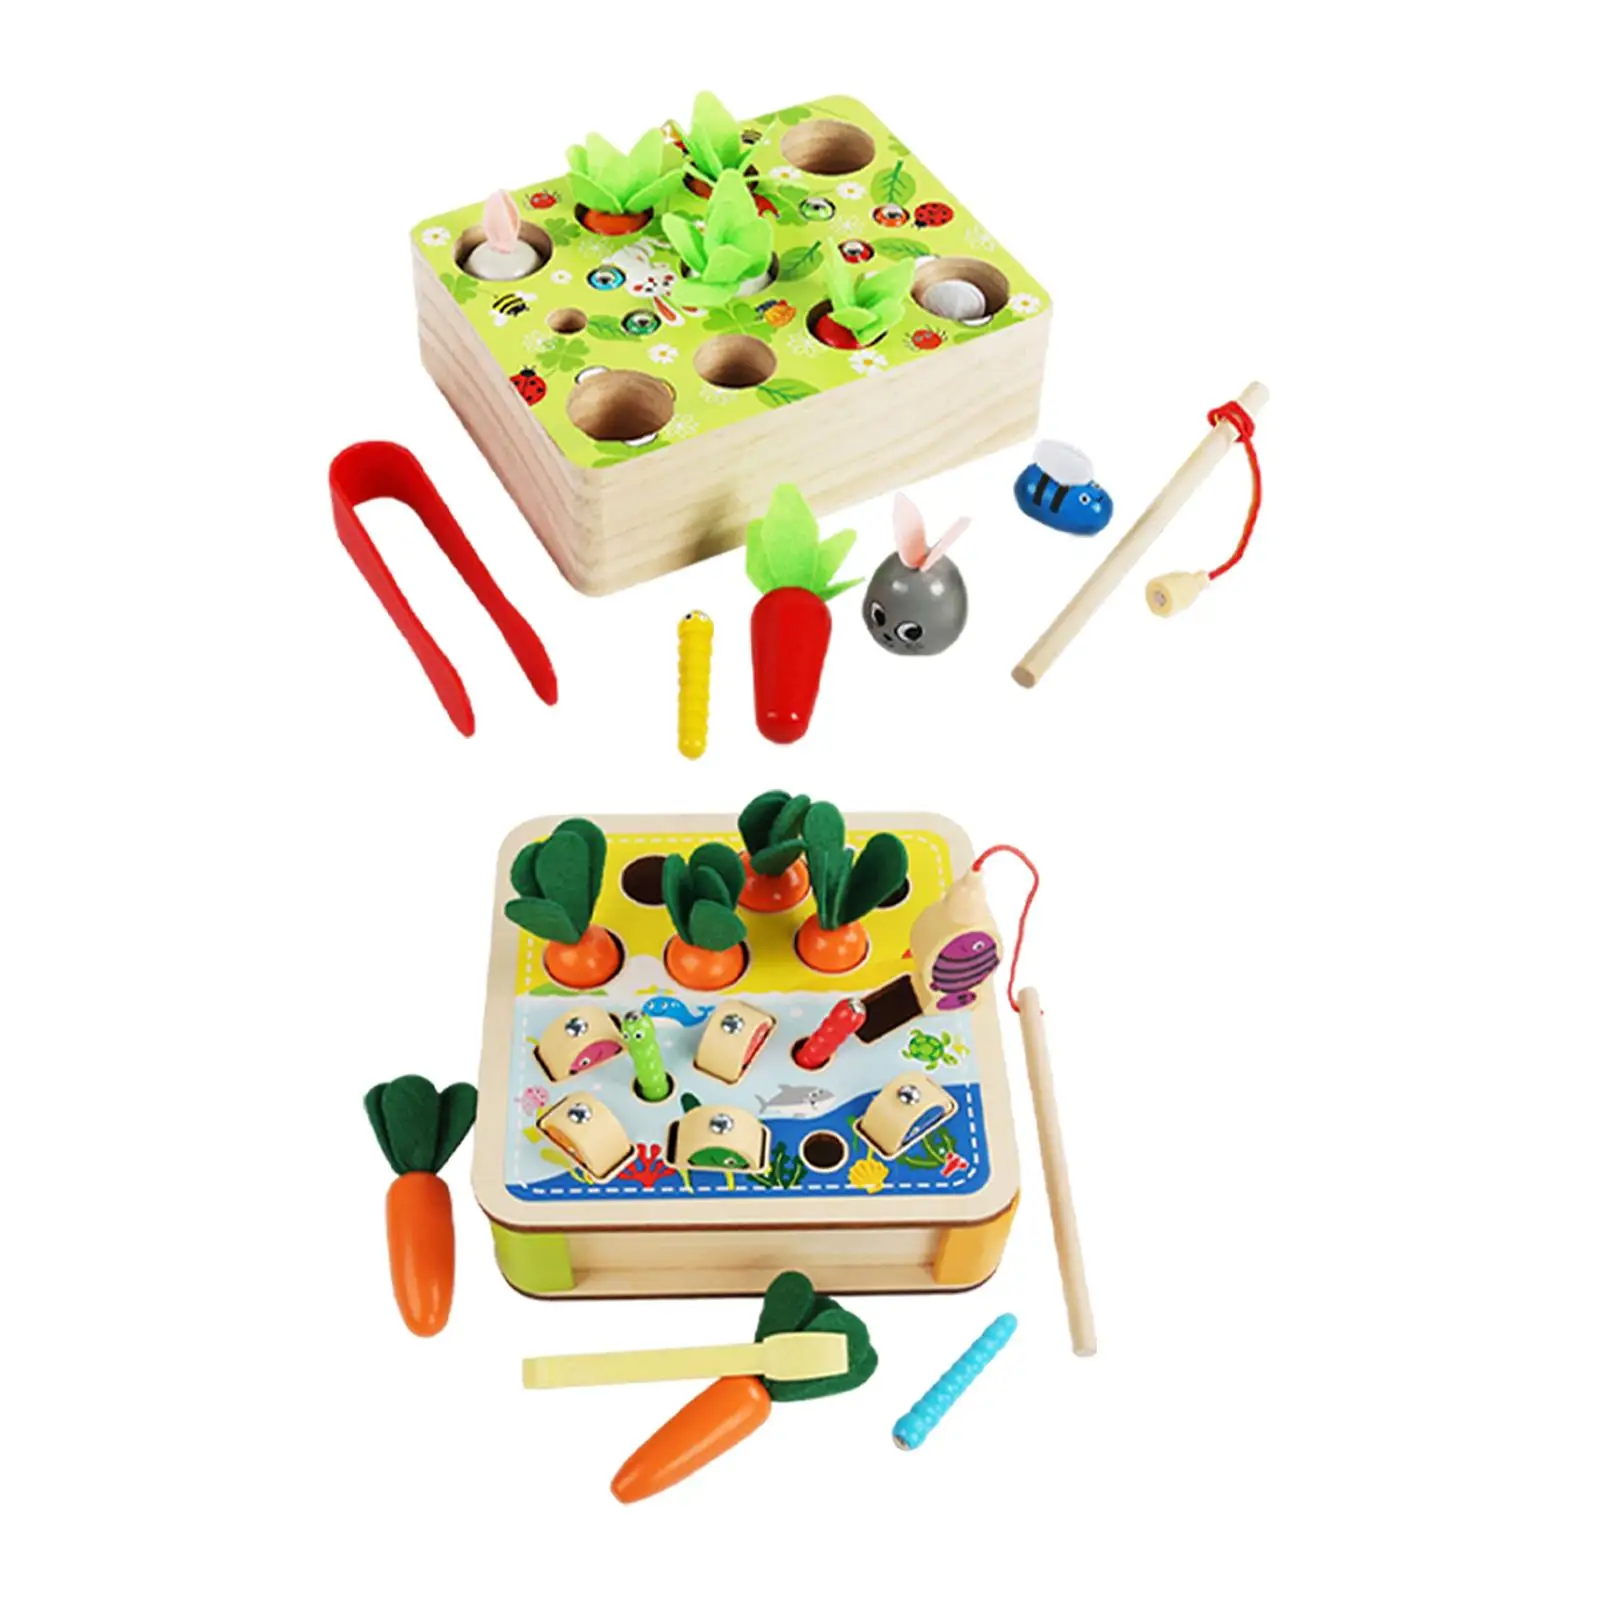 Wooden Pulling Radish Toys Interactive Toys Preschool Learning Toys Education Matching Game for Toddler Baby Holiday Gifts